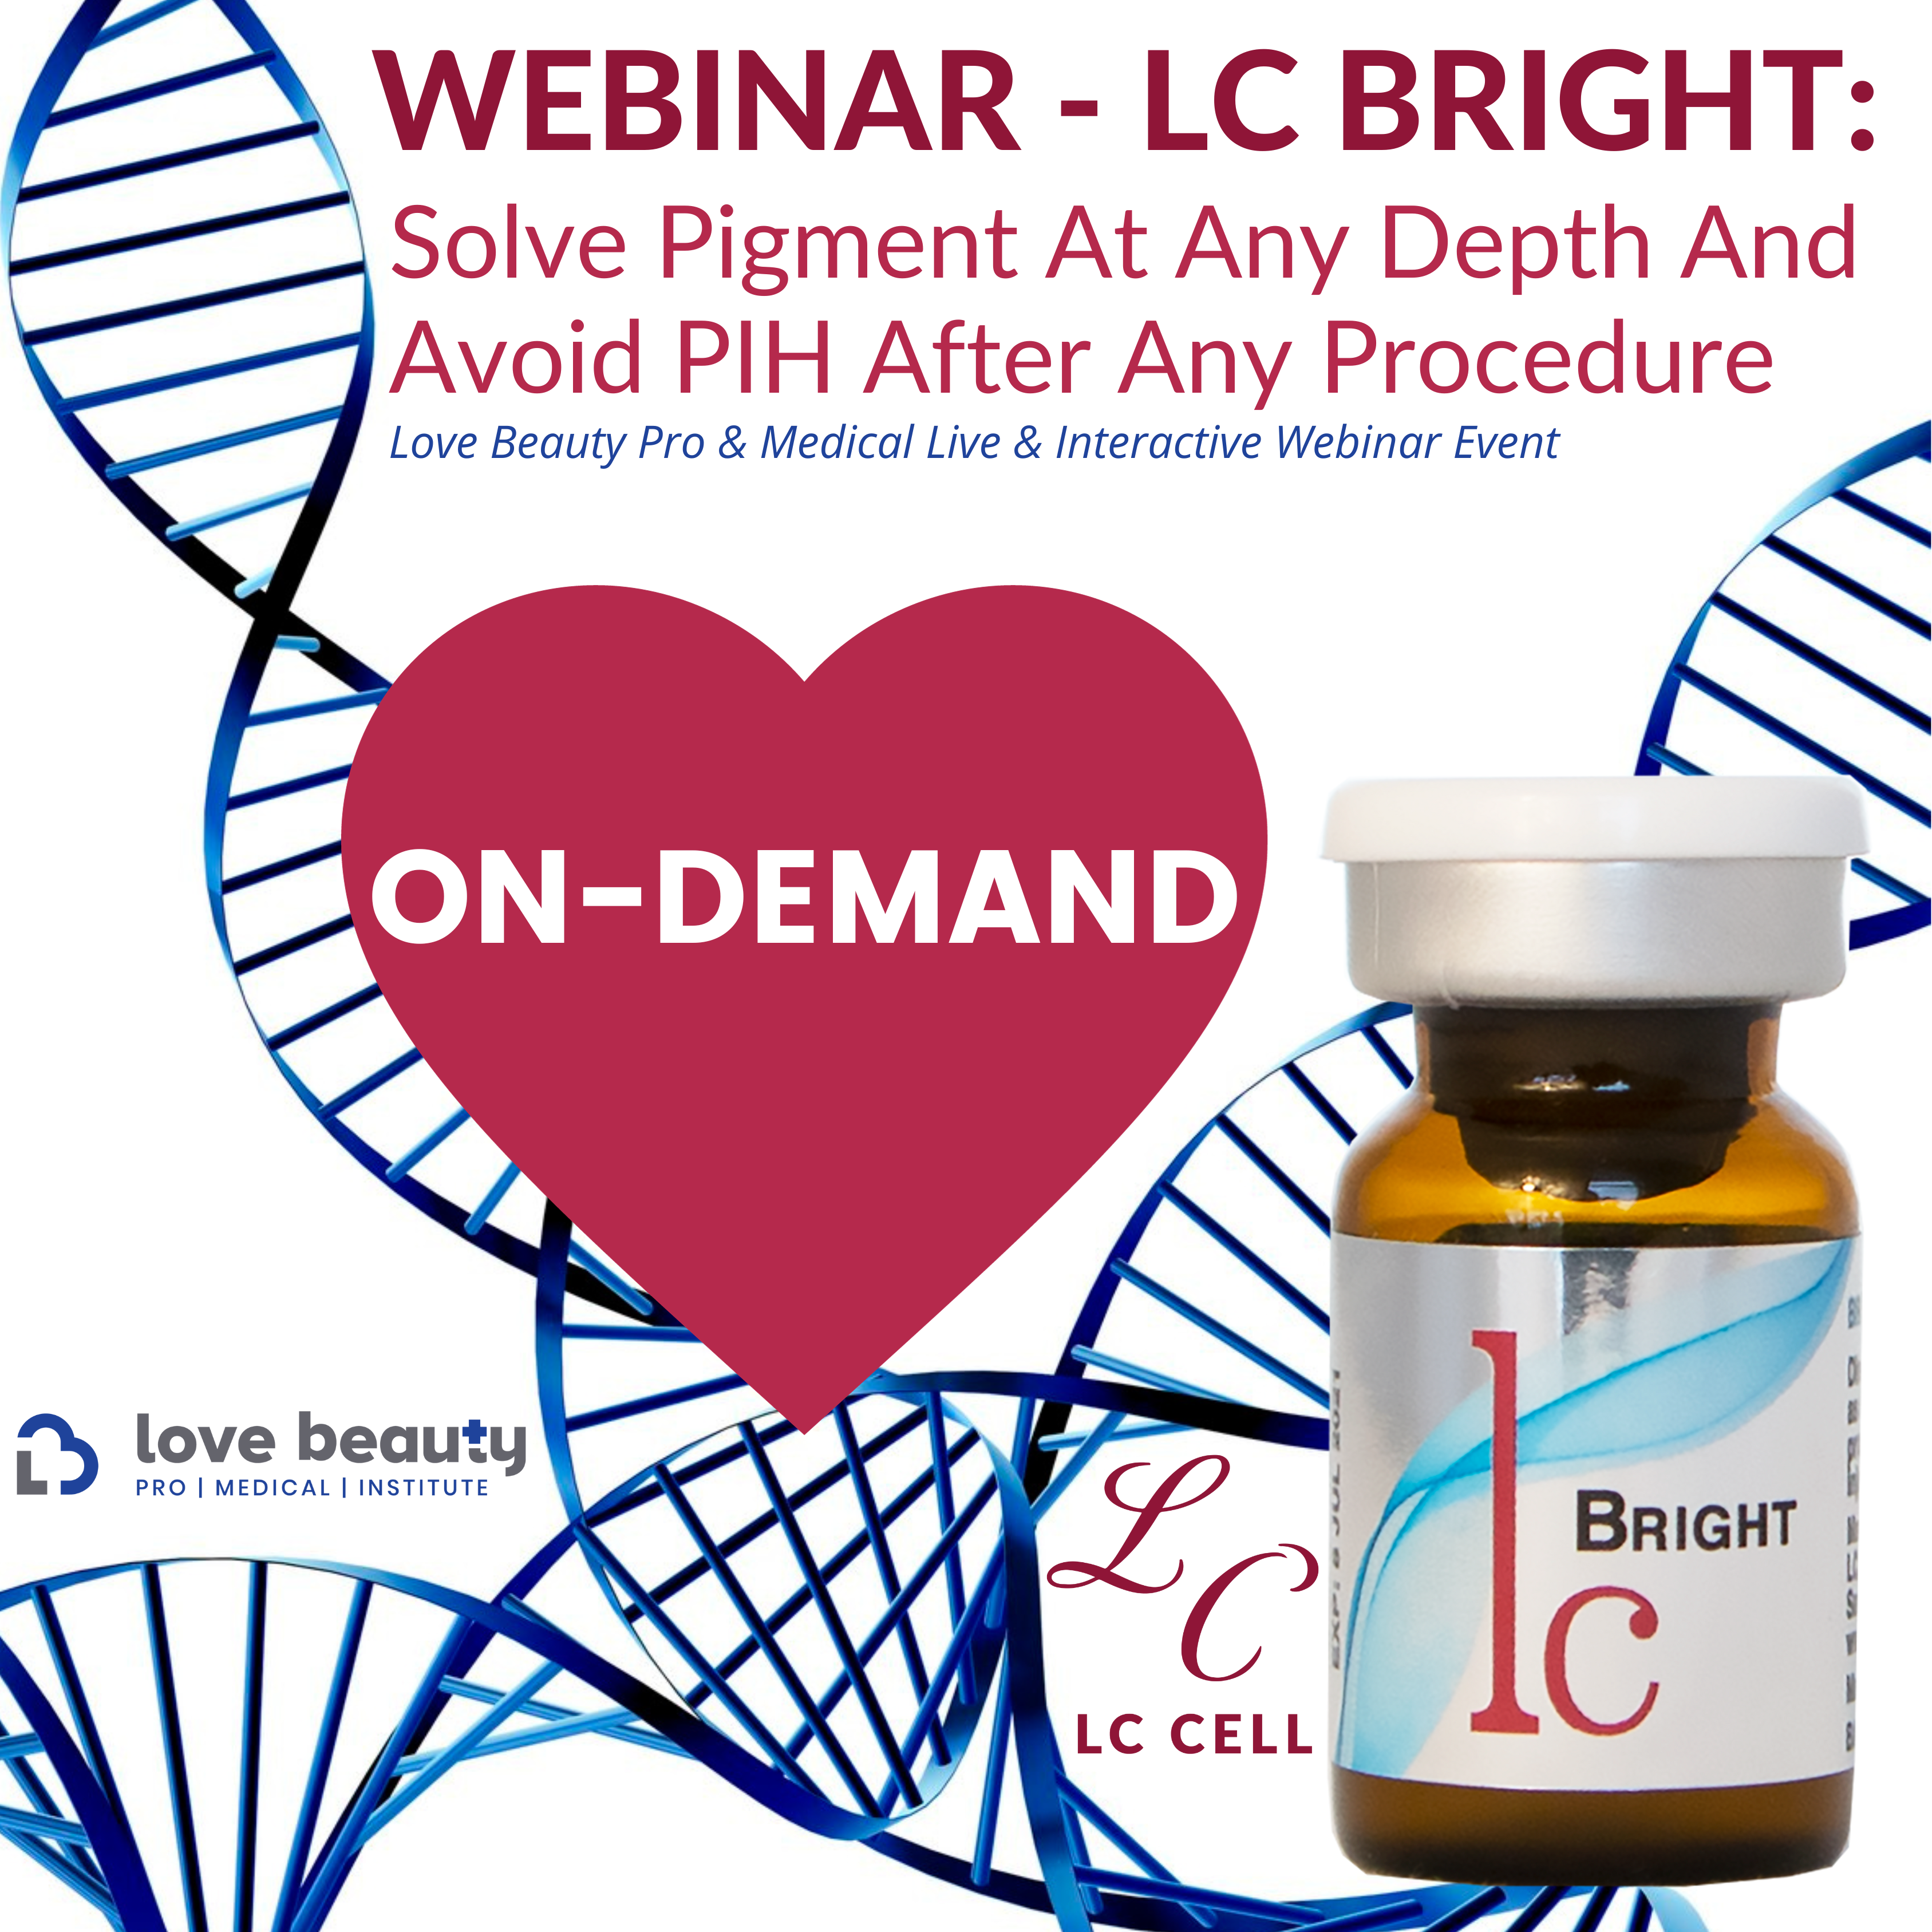 ON-DEMAND WEBINAR – LC Bright: Solve Pigment at Any Depth and Avoid PIH After Any Procedure